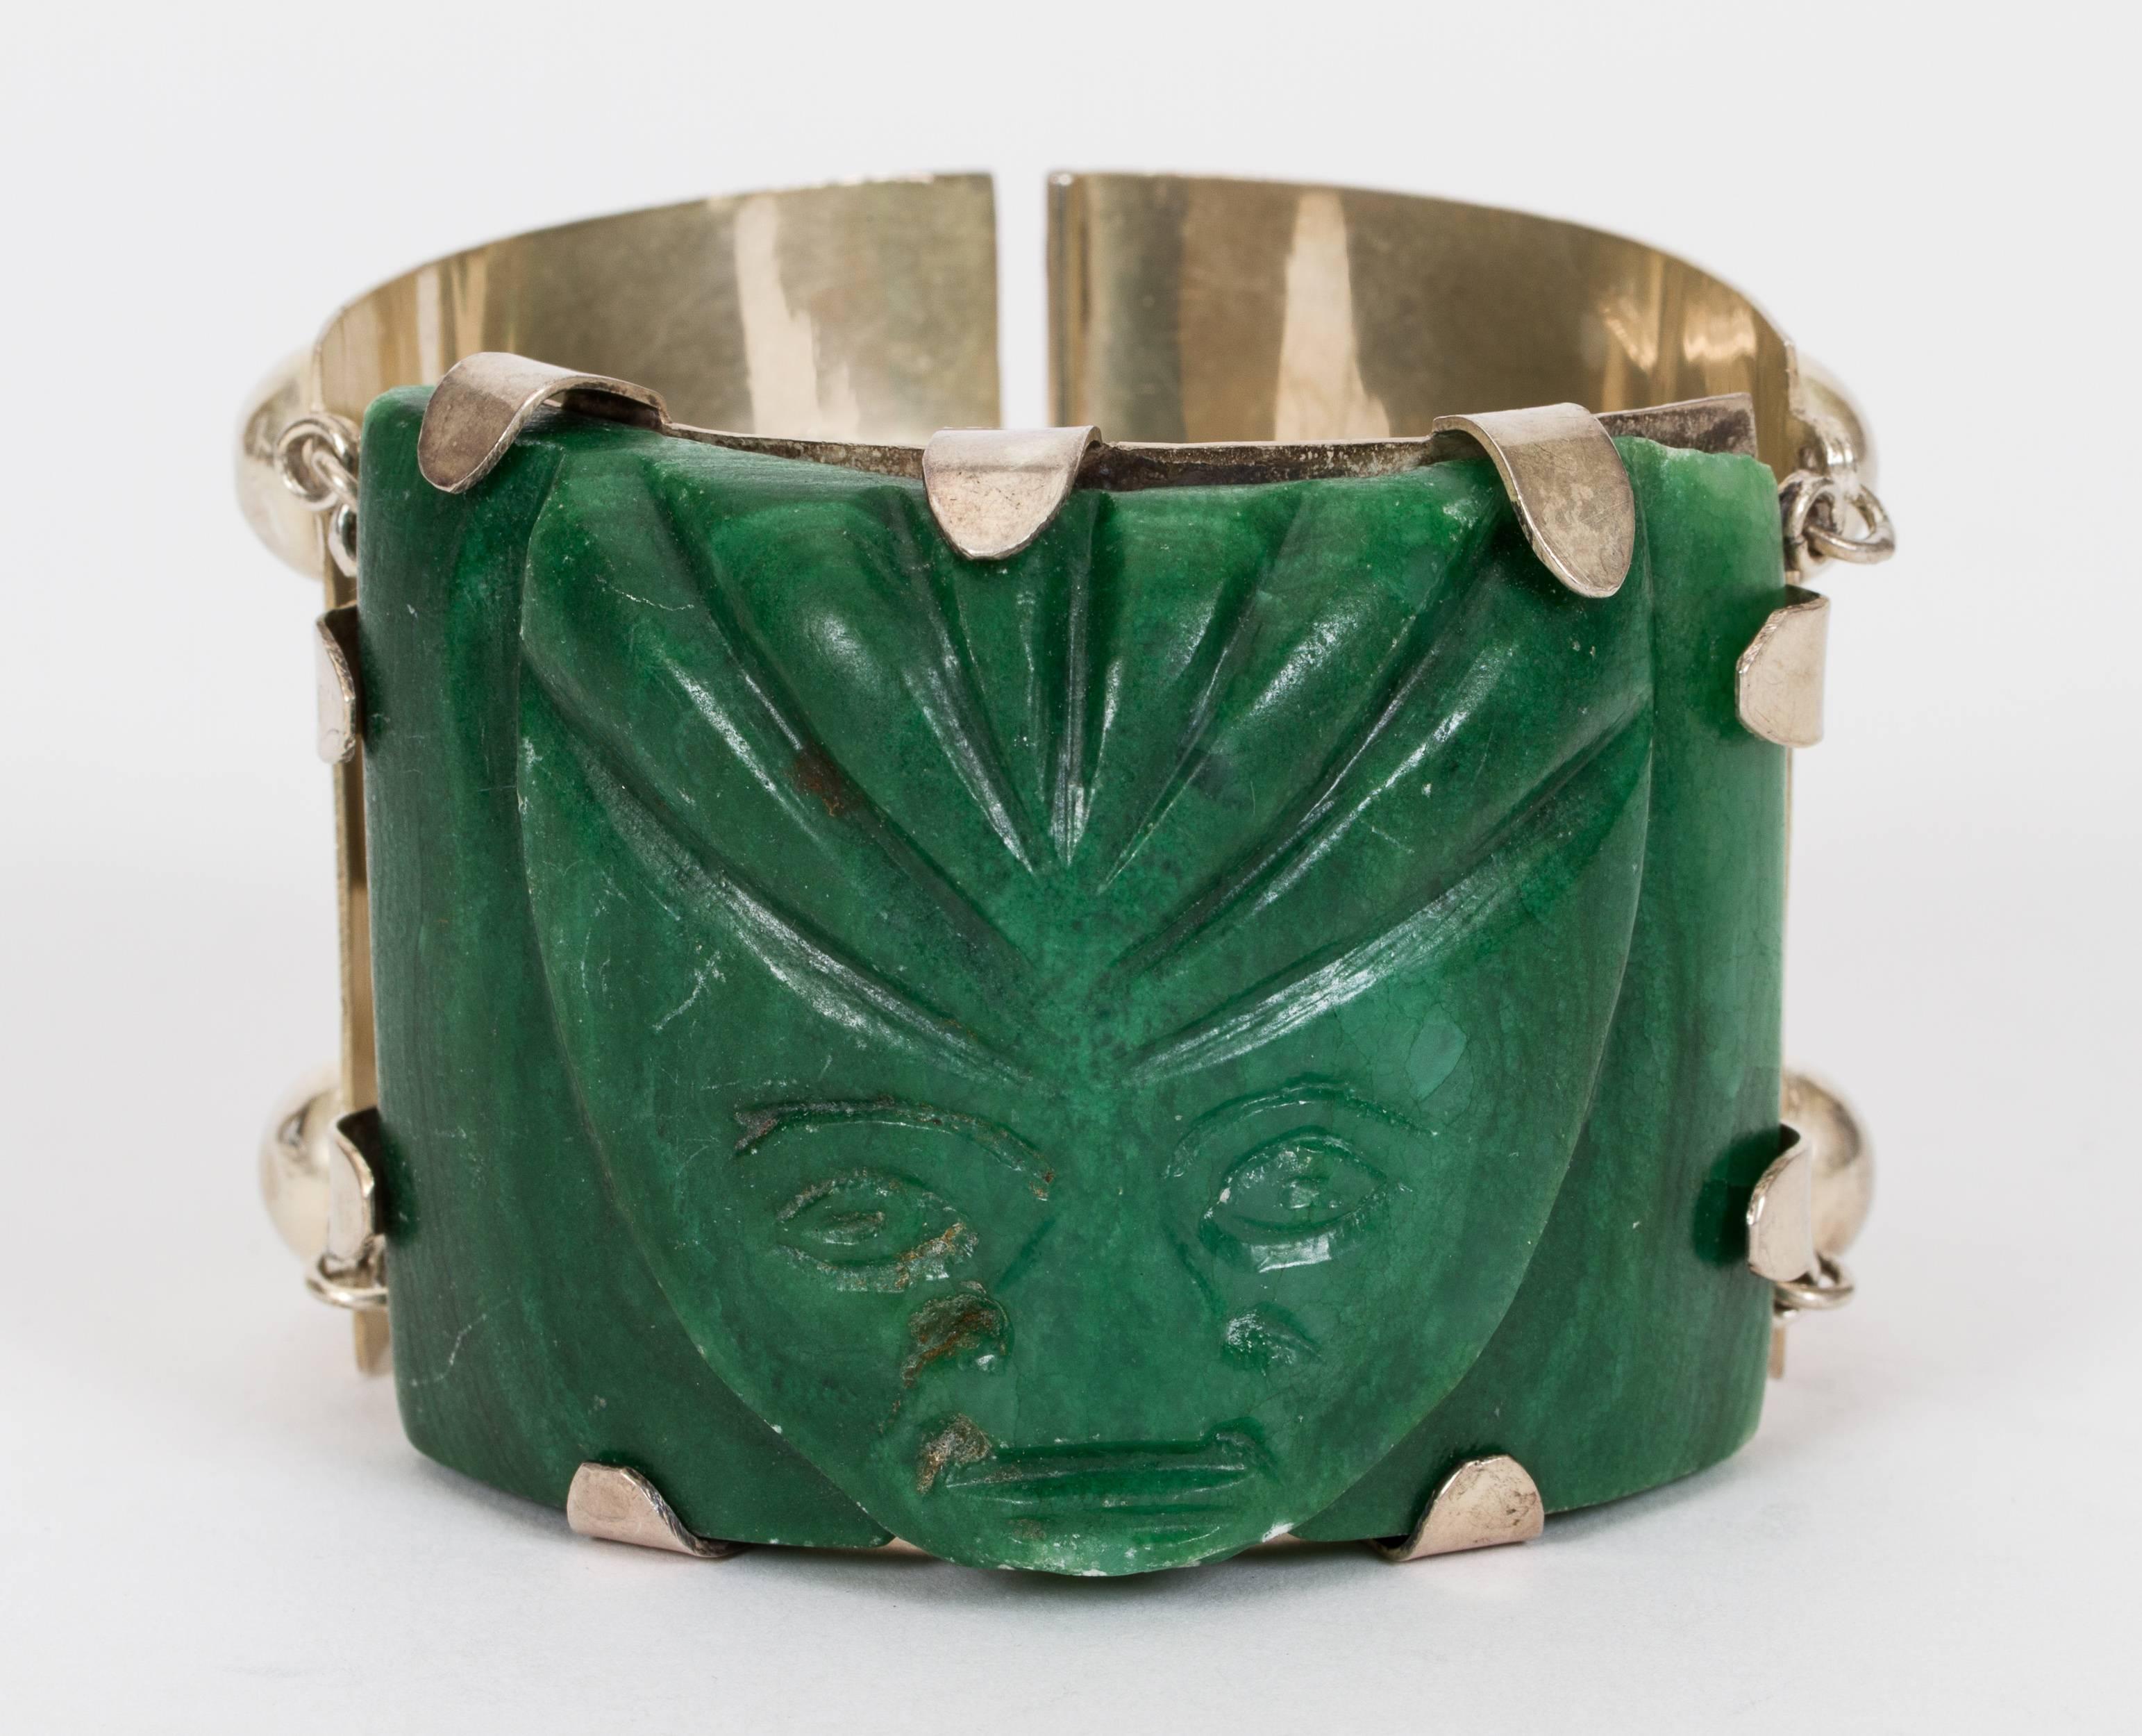 Mexican sterling silver hinge clasp heavy weight bracelet with ornate carved resin colored jade center with side center stones. Comes in velvet pouch. 